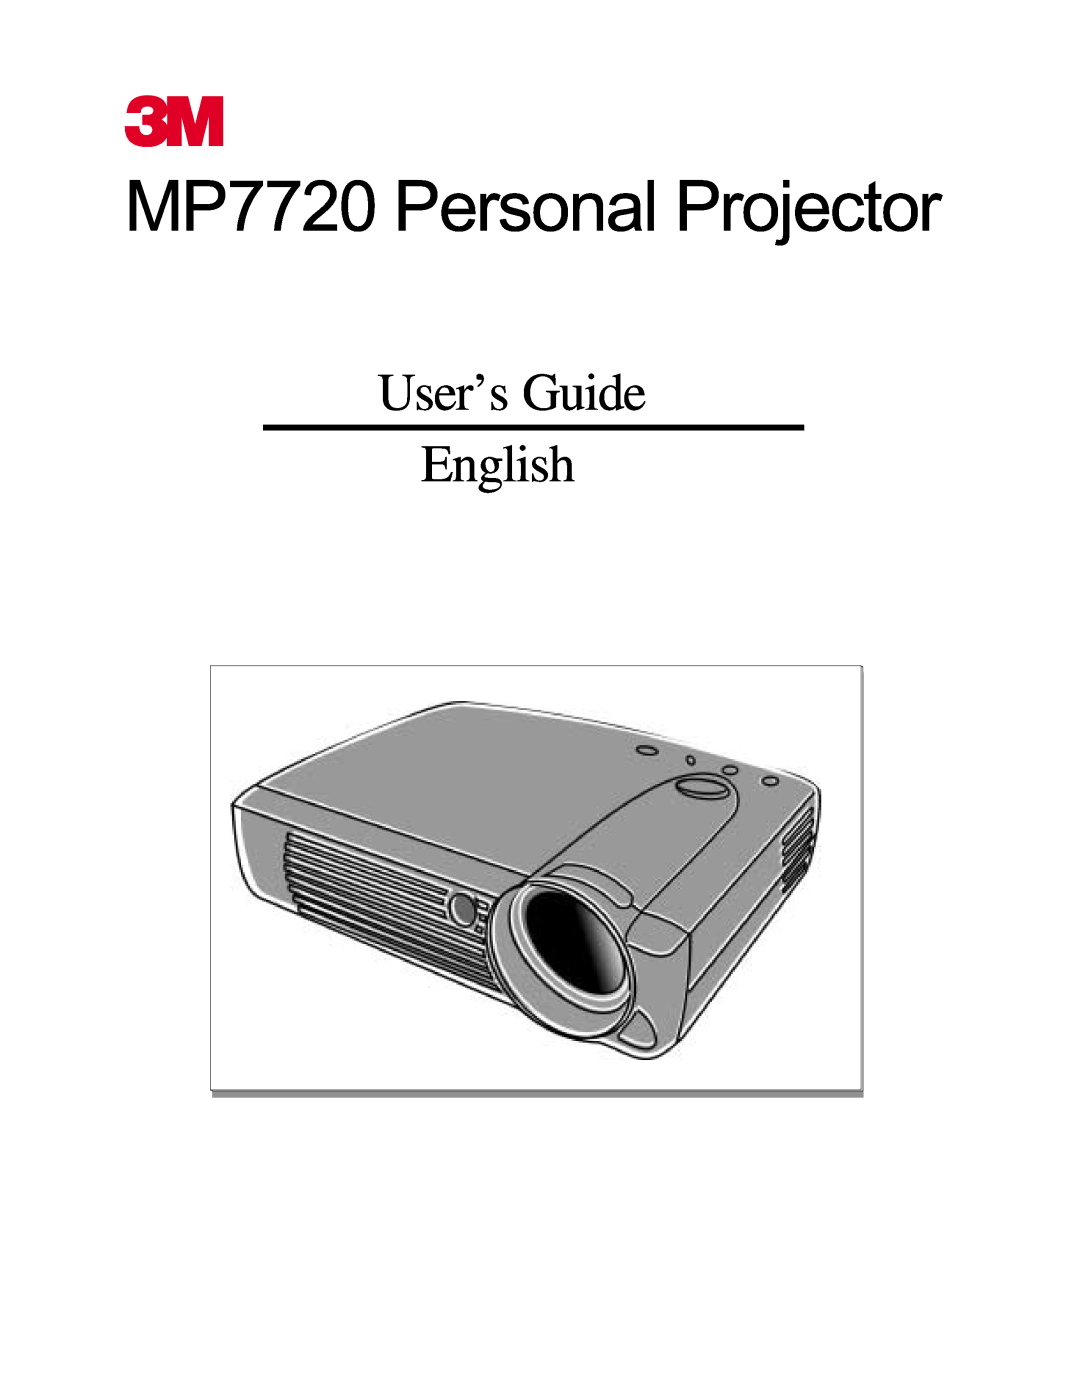 3M manual MP7720 Personal Projector, User’s Guide English 